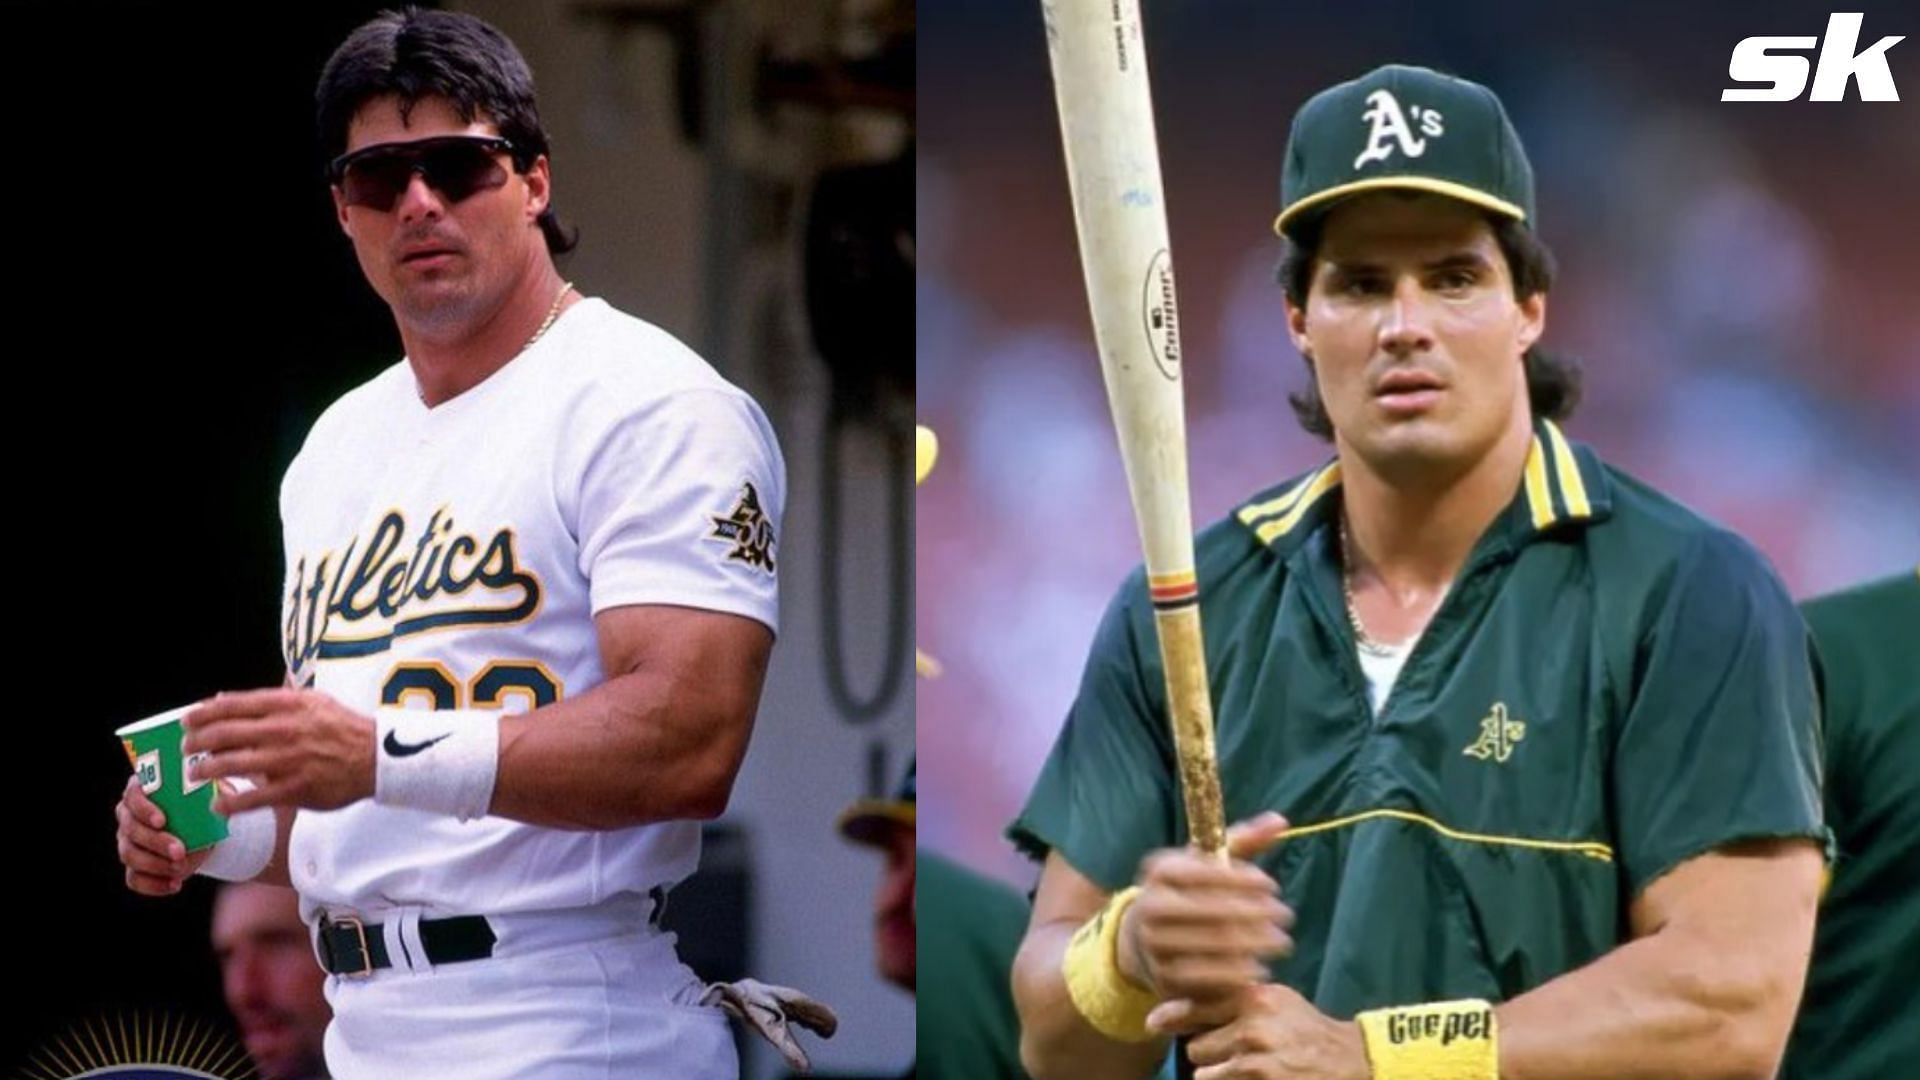 When Jose Canseco felt remorse for chasing easy baseball stardom